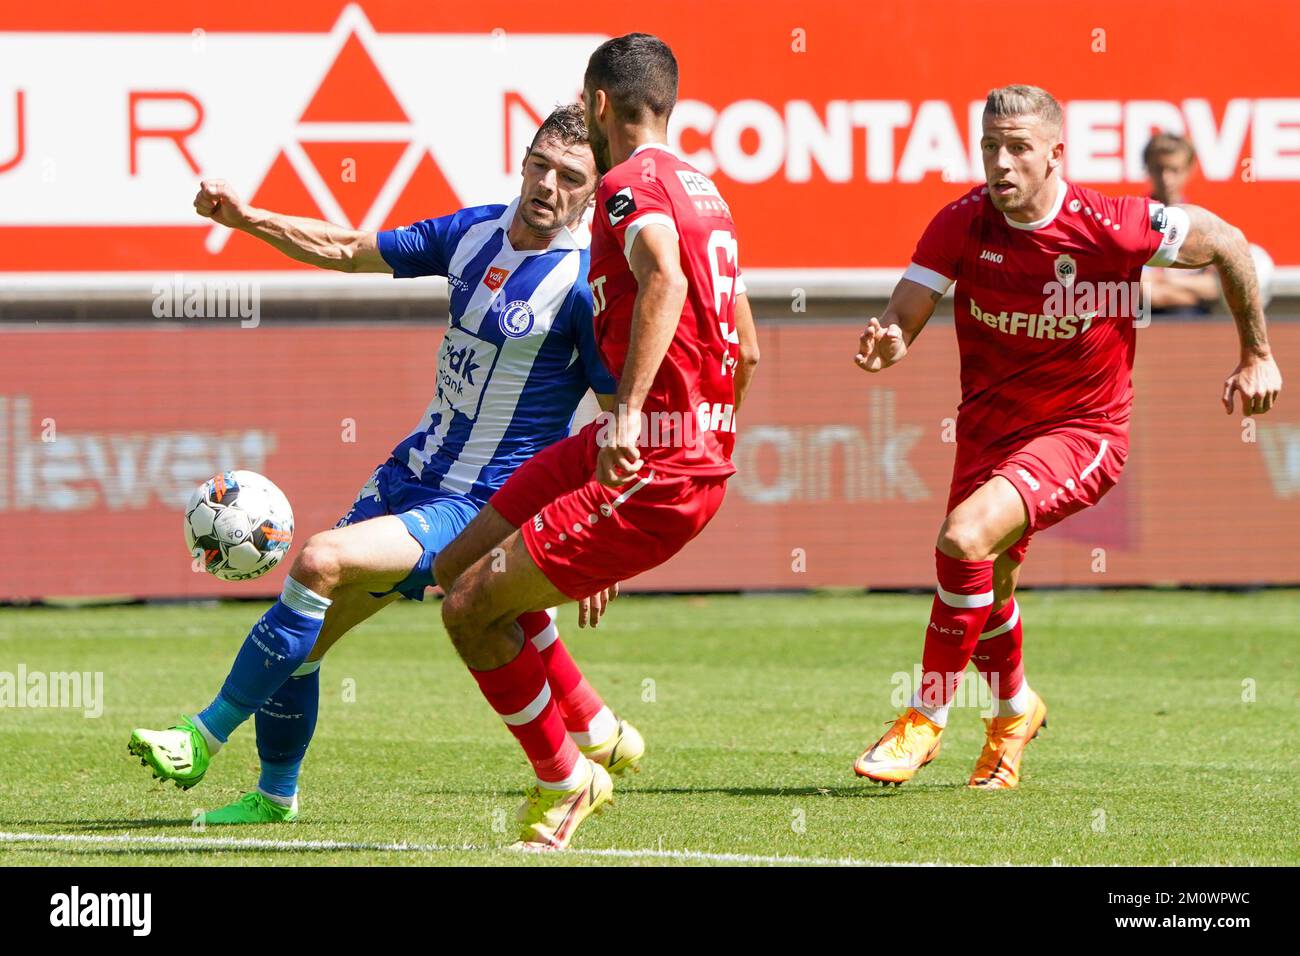 GENT, BELGIUM - AUGUST 28: Hugo Cuypers of KAA Gent battles for the ball with Dinis Almeida of Royal Antwerp FC during the Jupiler Pro League match between KAA Gent and Royal Antwerp FC at Ghelamco Arena on August 28, 2022 in Gent, Belgium (Photo by Joris Verwijst/Orange Pictures) Stock Photo